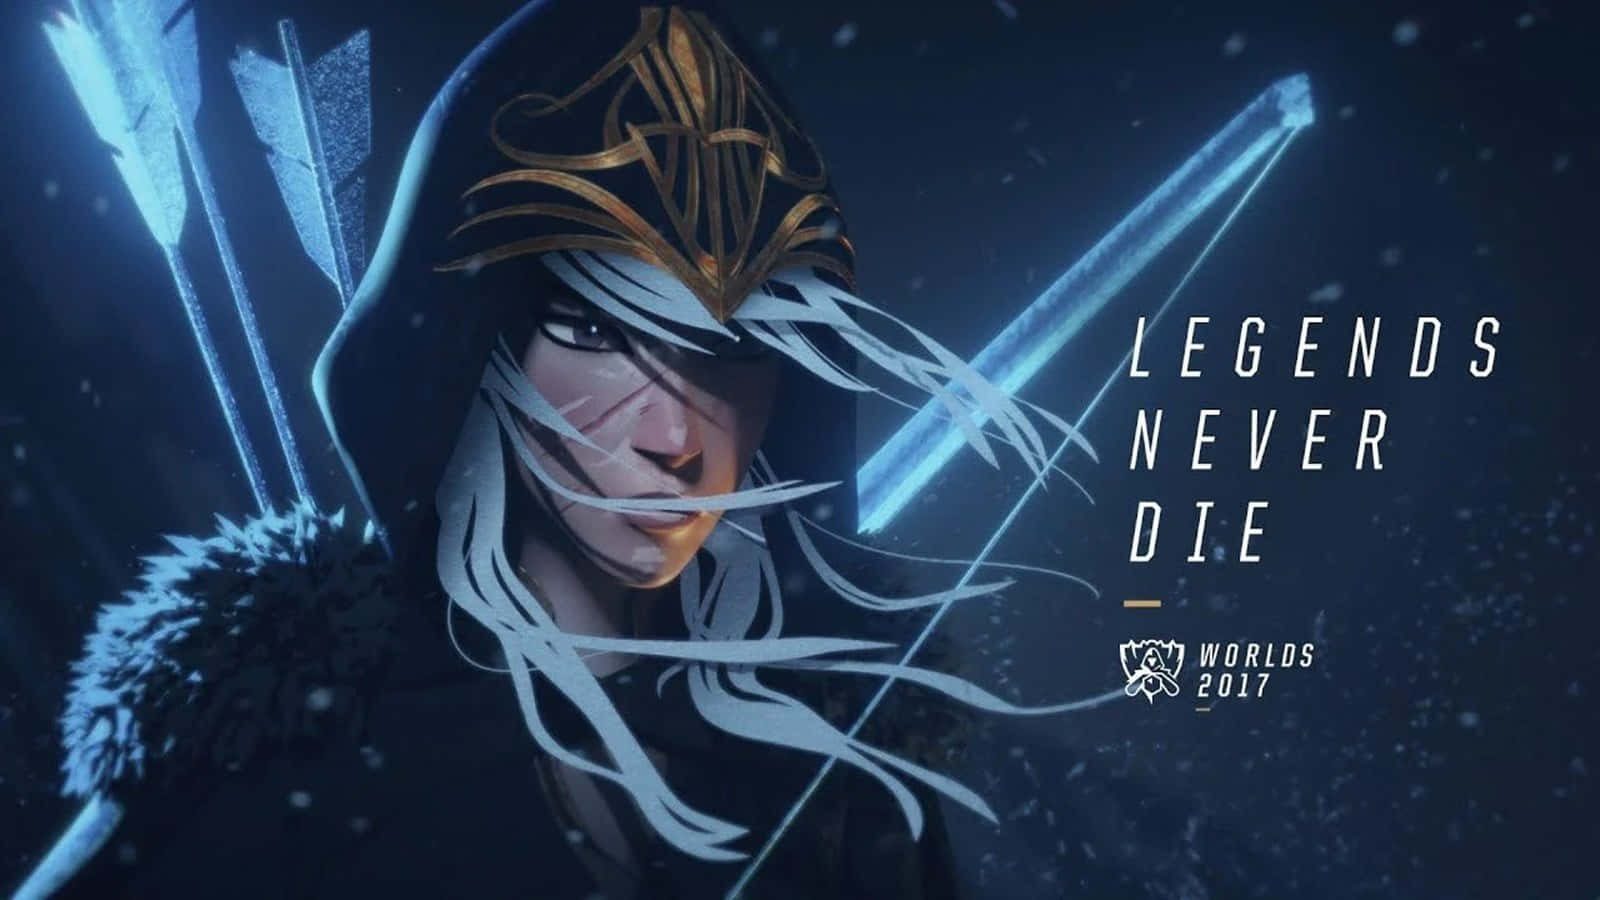 legends never die - a female character with arrows Wallpaper